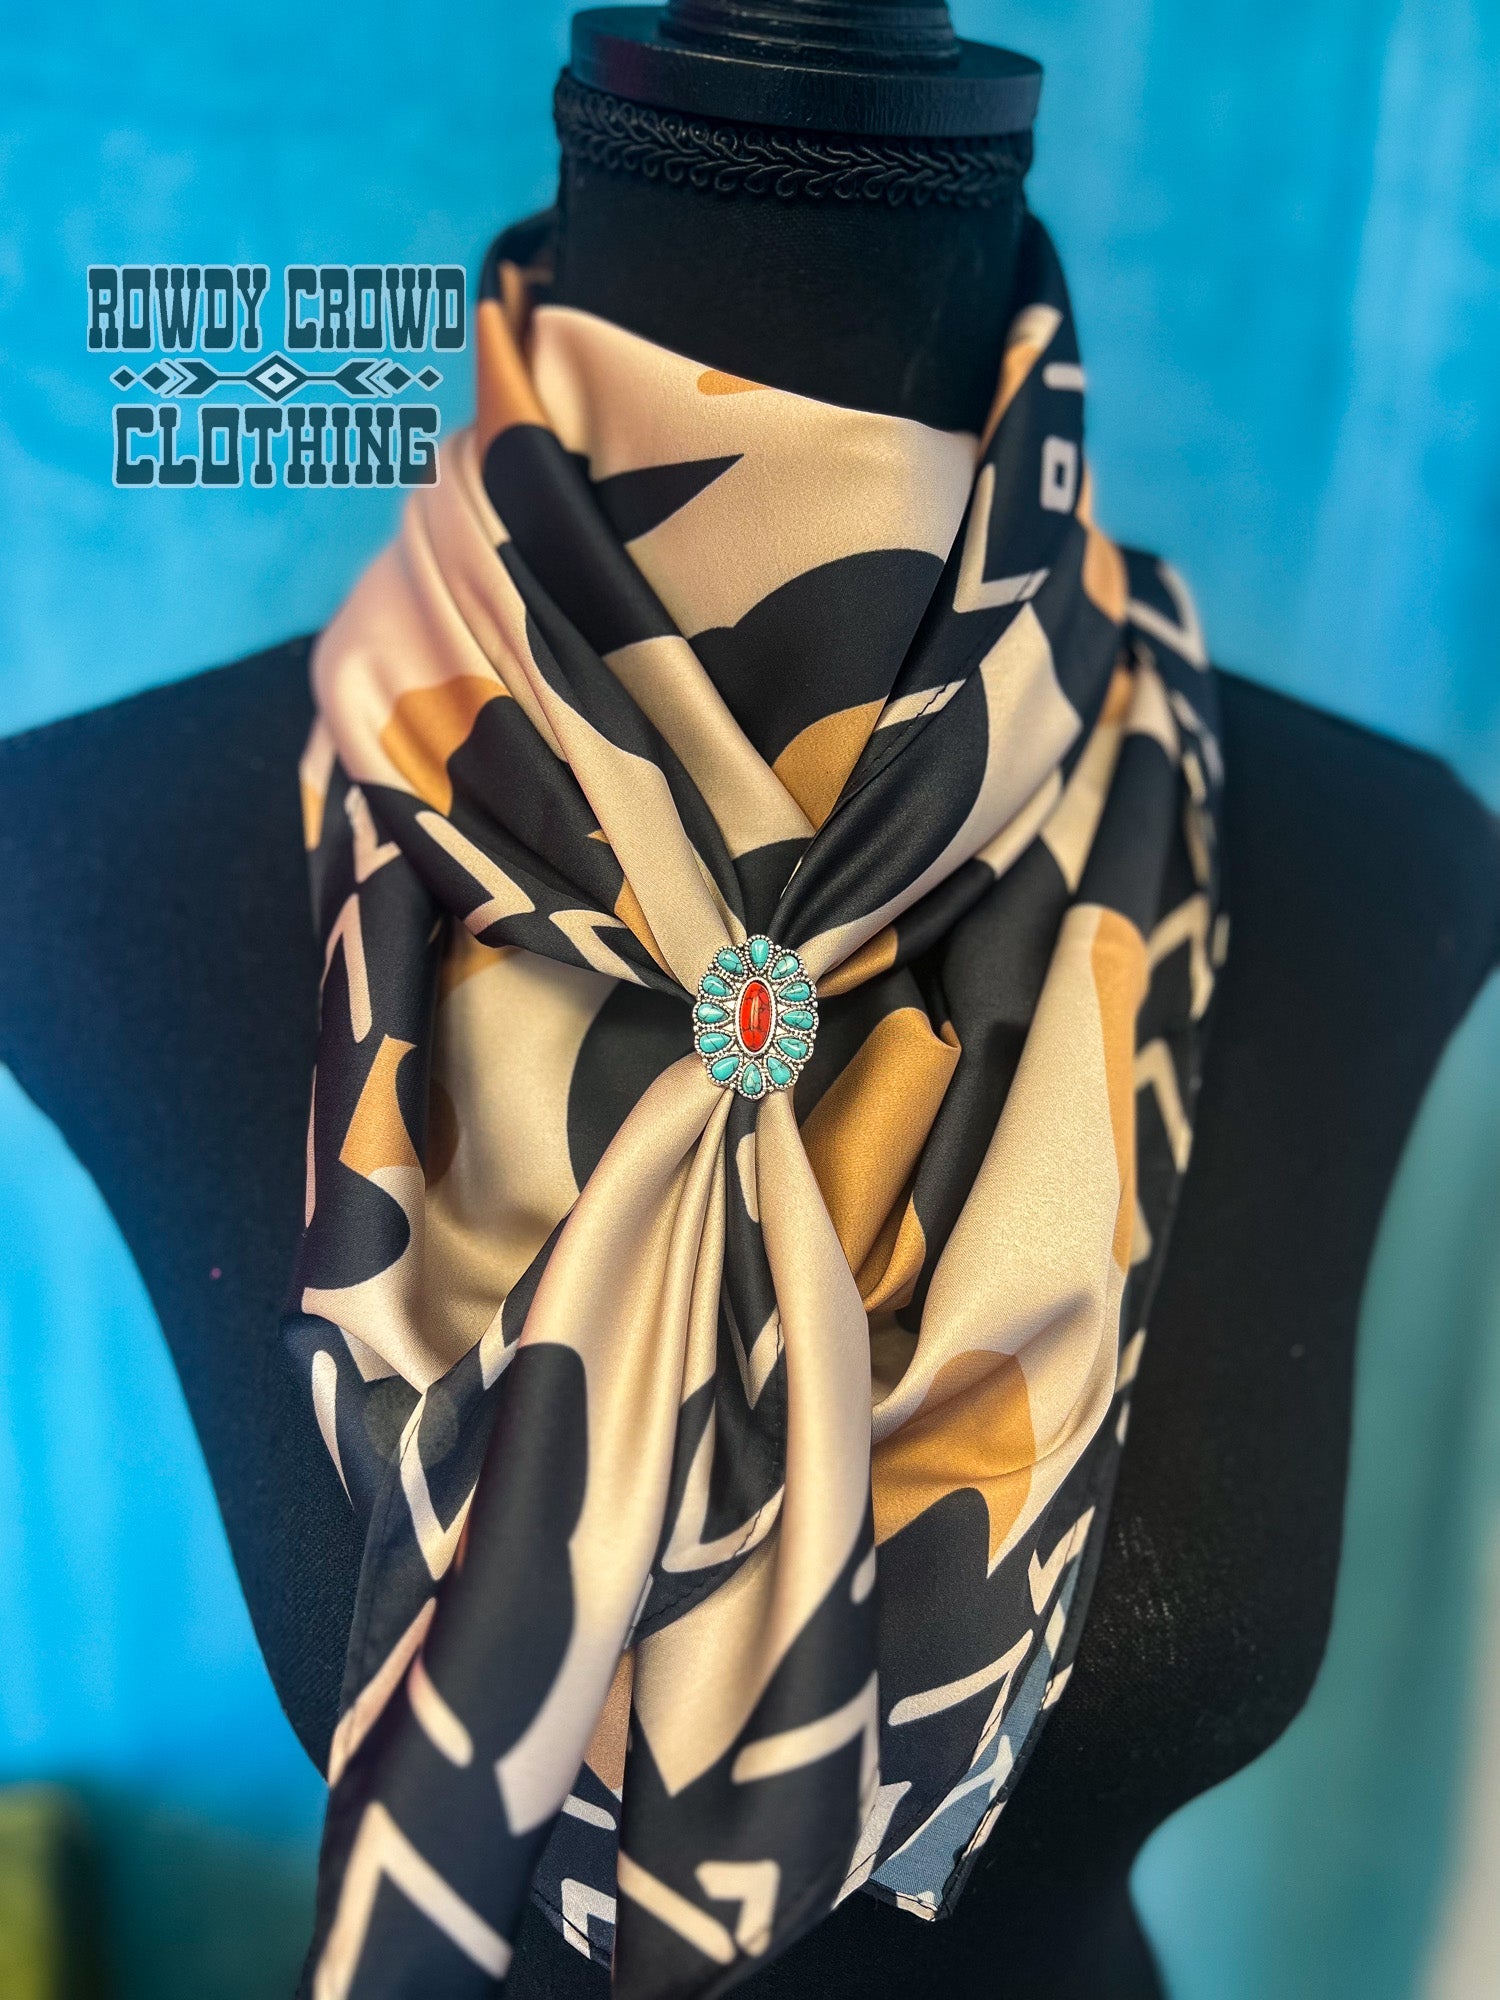  Western Accessories, Western Jewelry, Southwestern Jewelry, Western Jewelry Wholesale, Cowgirl Jewelry, Western Wholesale, Wholesale Accessories, Wholesale Jewelry, Wild rag scarf slide, cowboy scarf slides, turquoise scarf slides, western scarf slides, scarf rings and slides